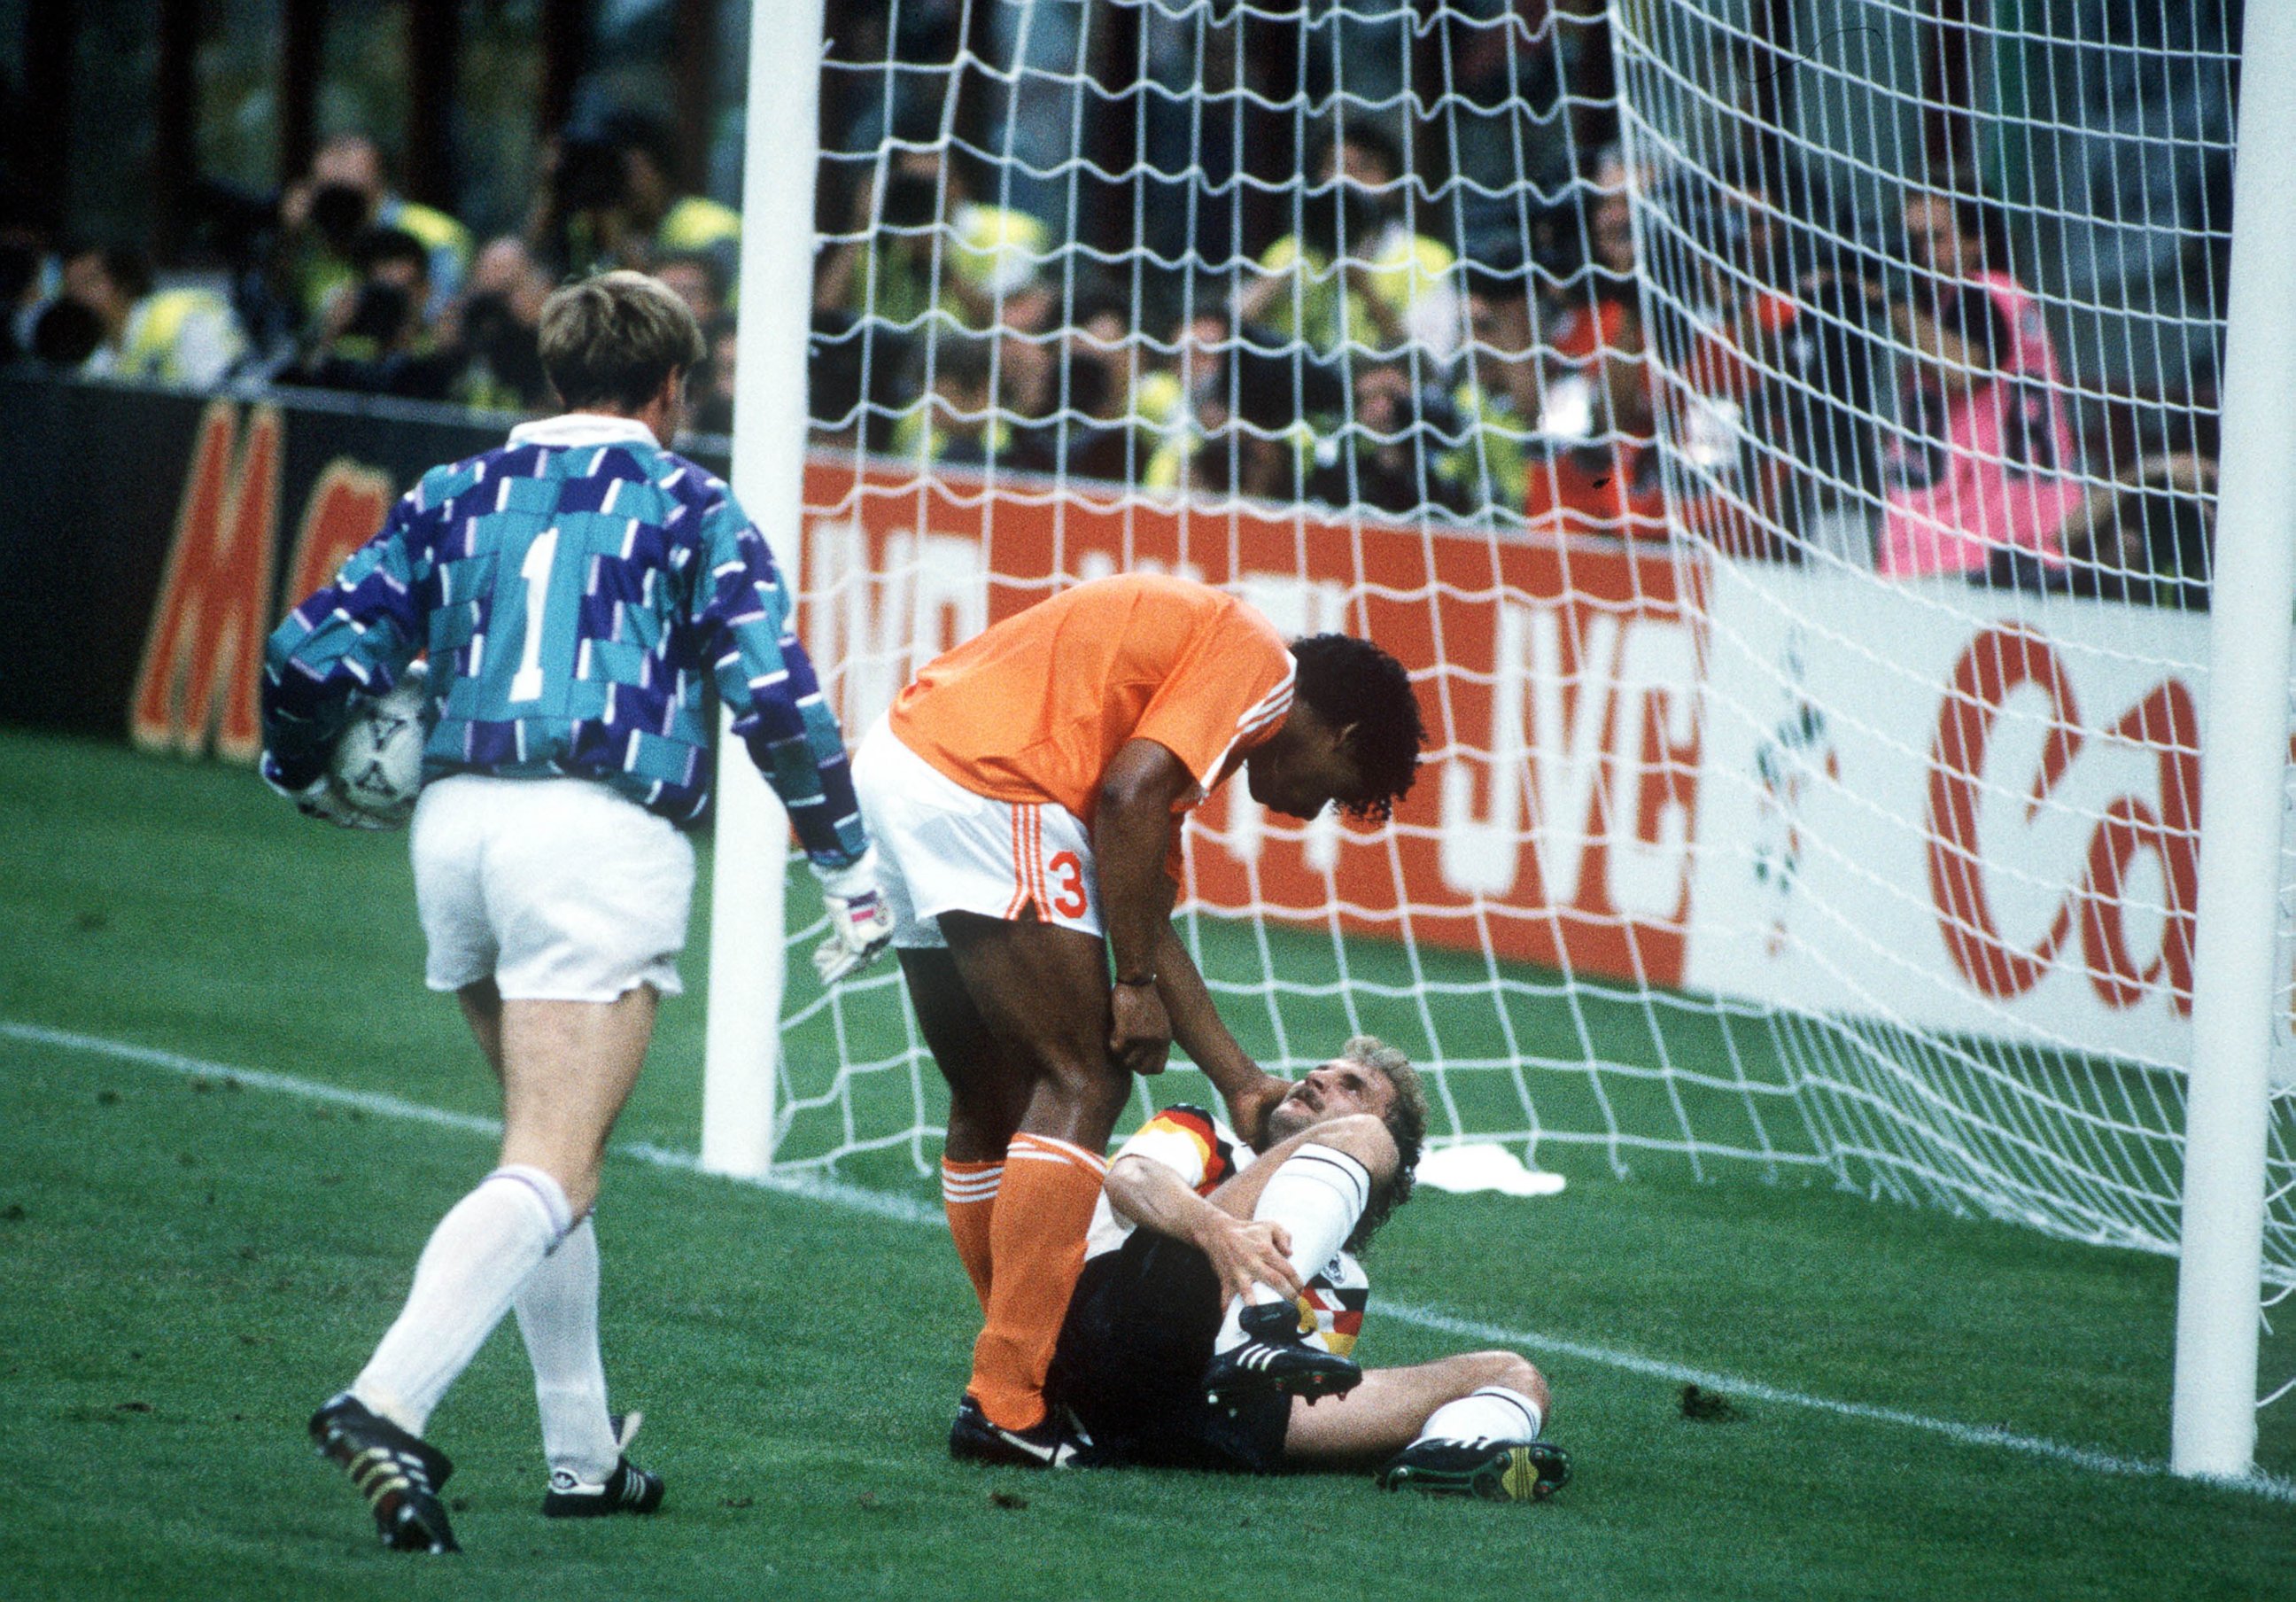 PHOTO: West Germany's Rudi Voeller, right, clashes with Holland's Frank Rijkaard, center, as Dutch goalkeeper Hans Van Breukelen, left, watches on June 24, 1990 in Milan, Italy. Rijkaard later spat on Voeller as they left the field after being sent off.